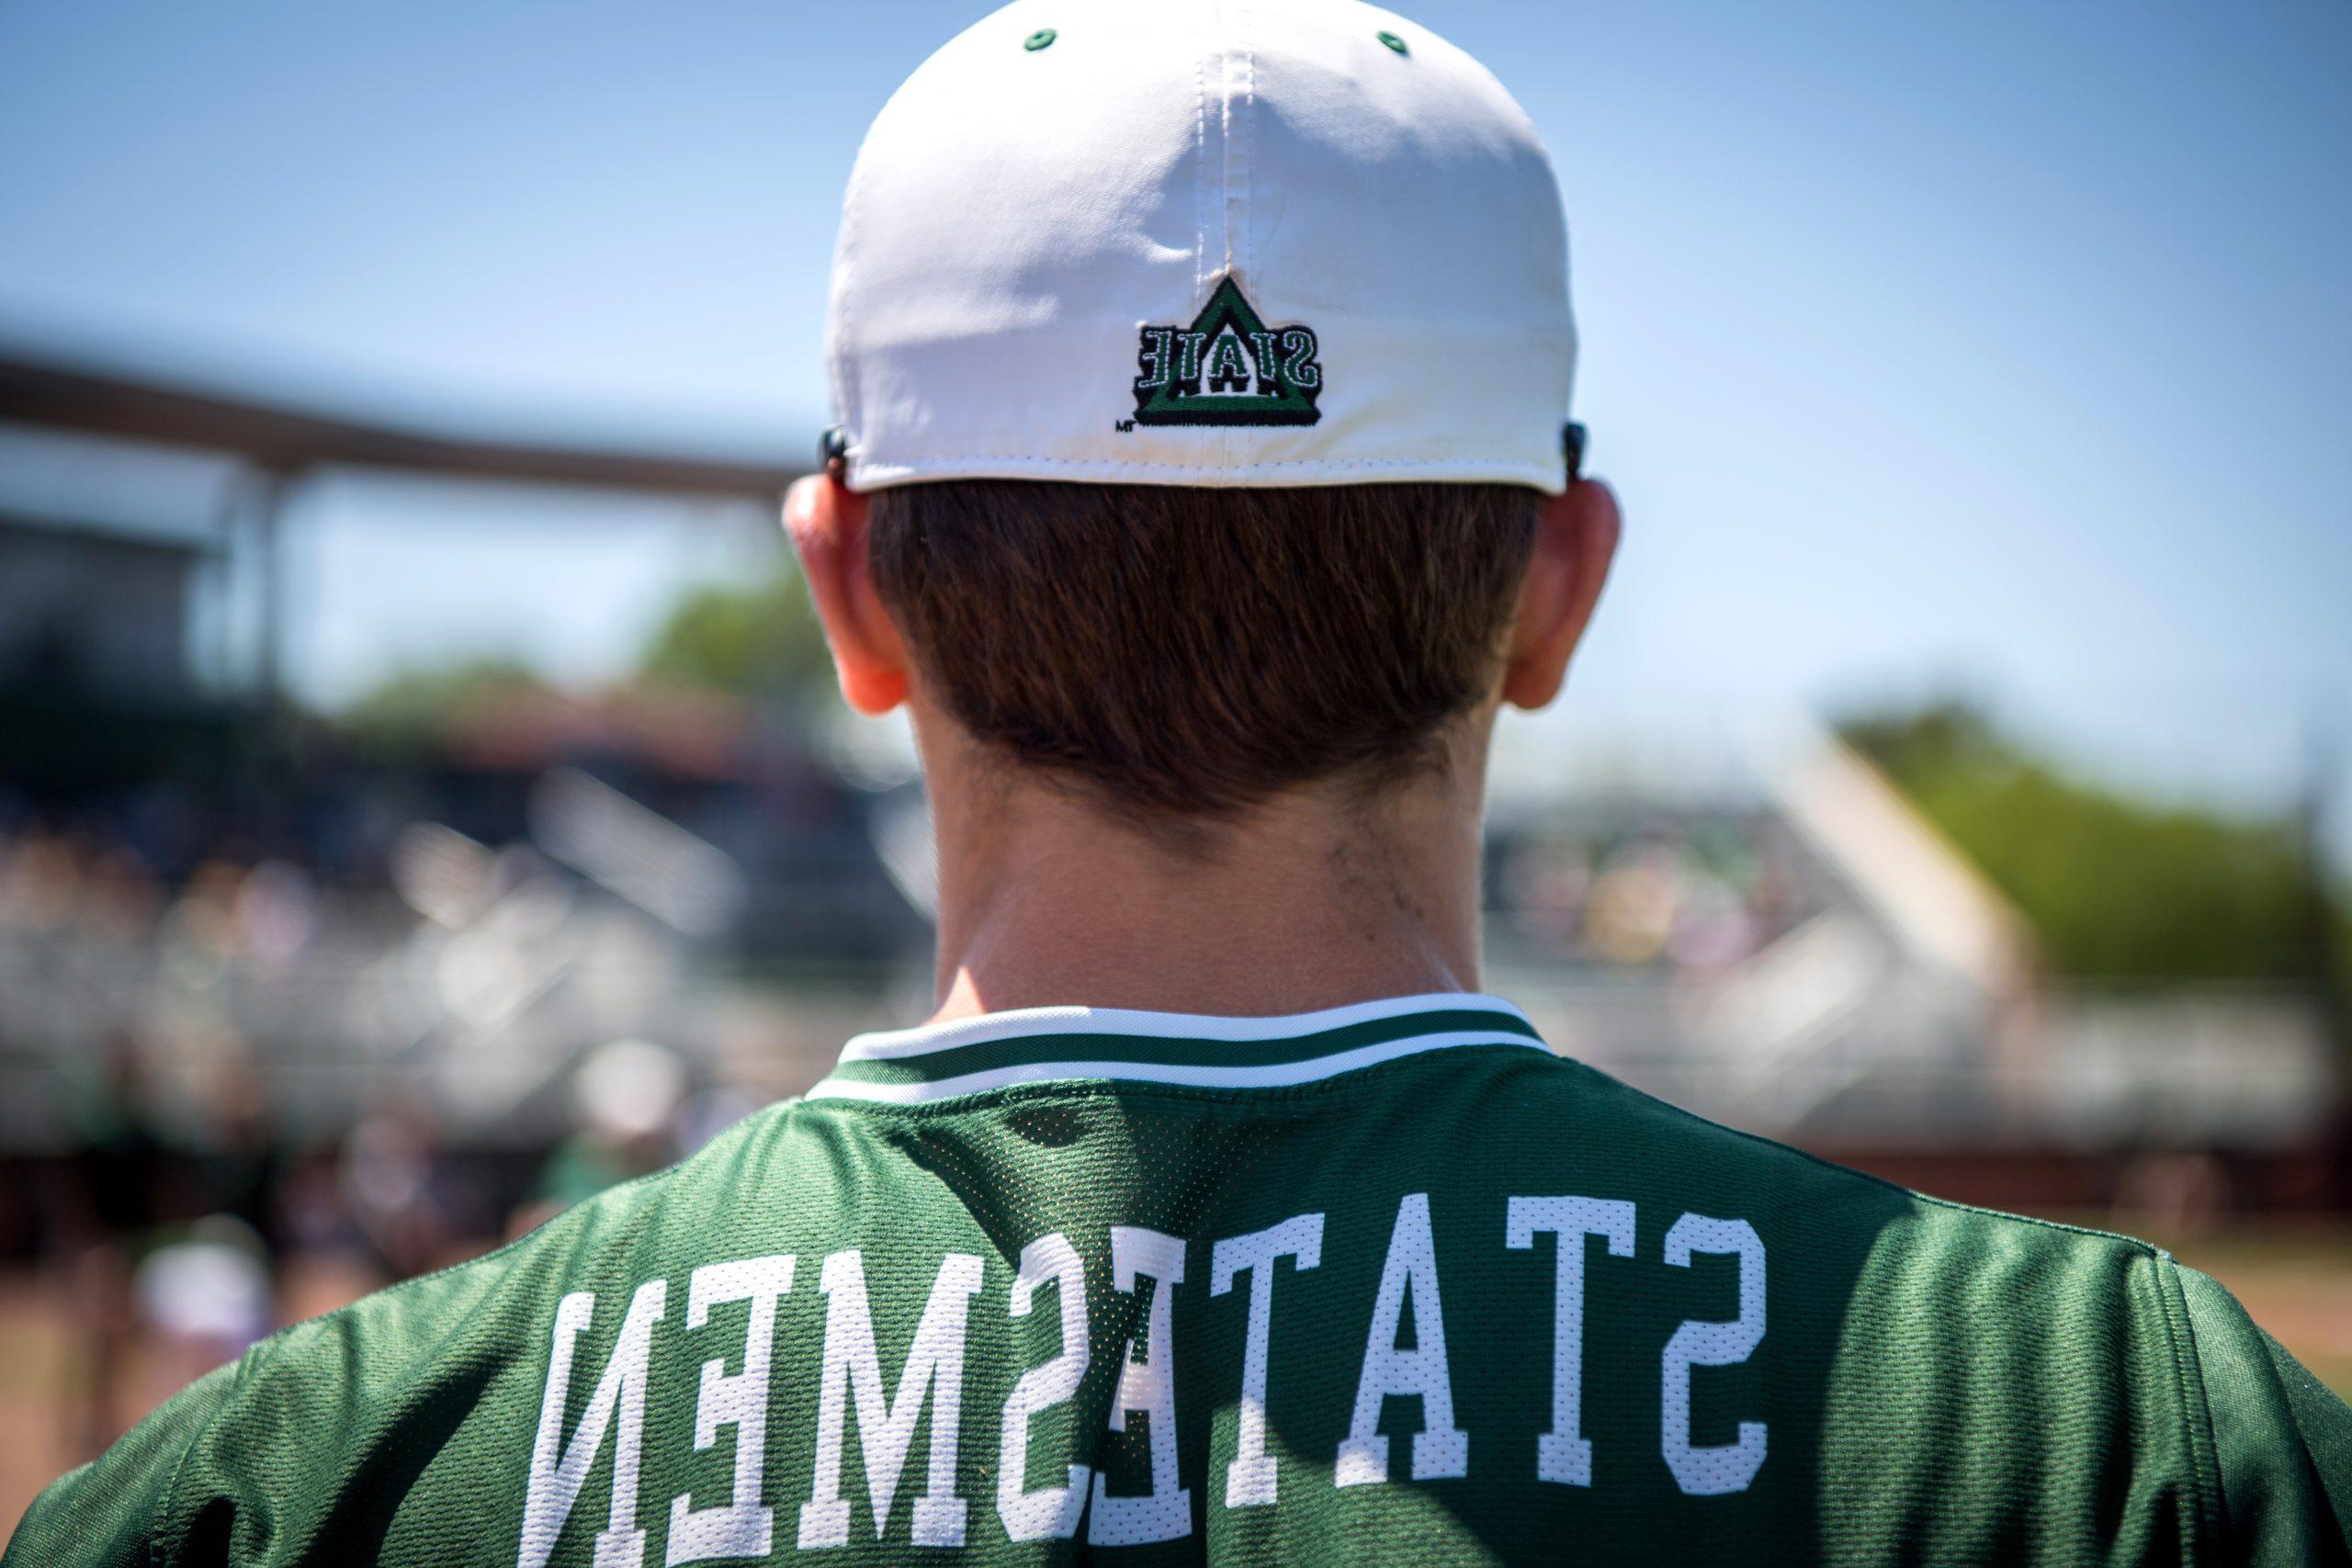 Delta State Baseball player with Statesmen Jersey and Delta State Athletics hat.